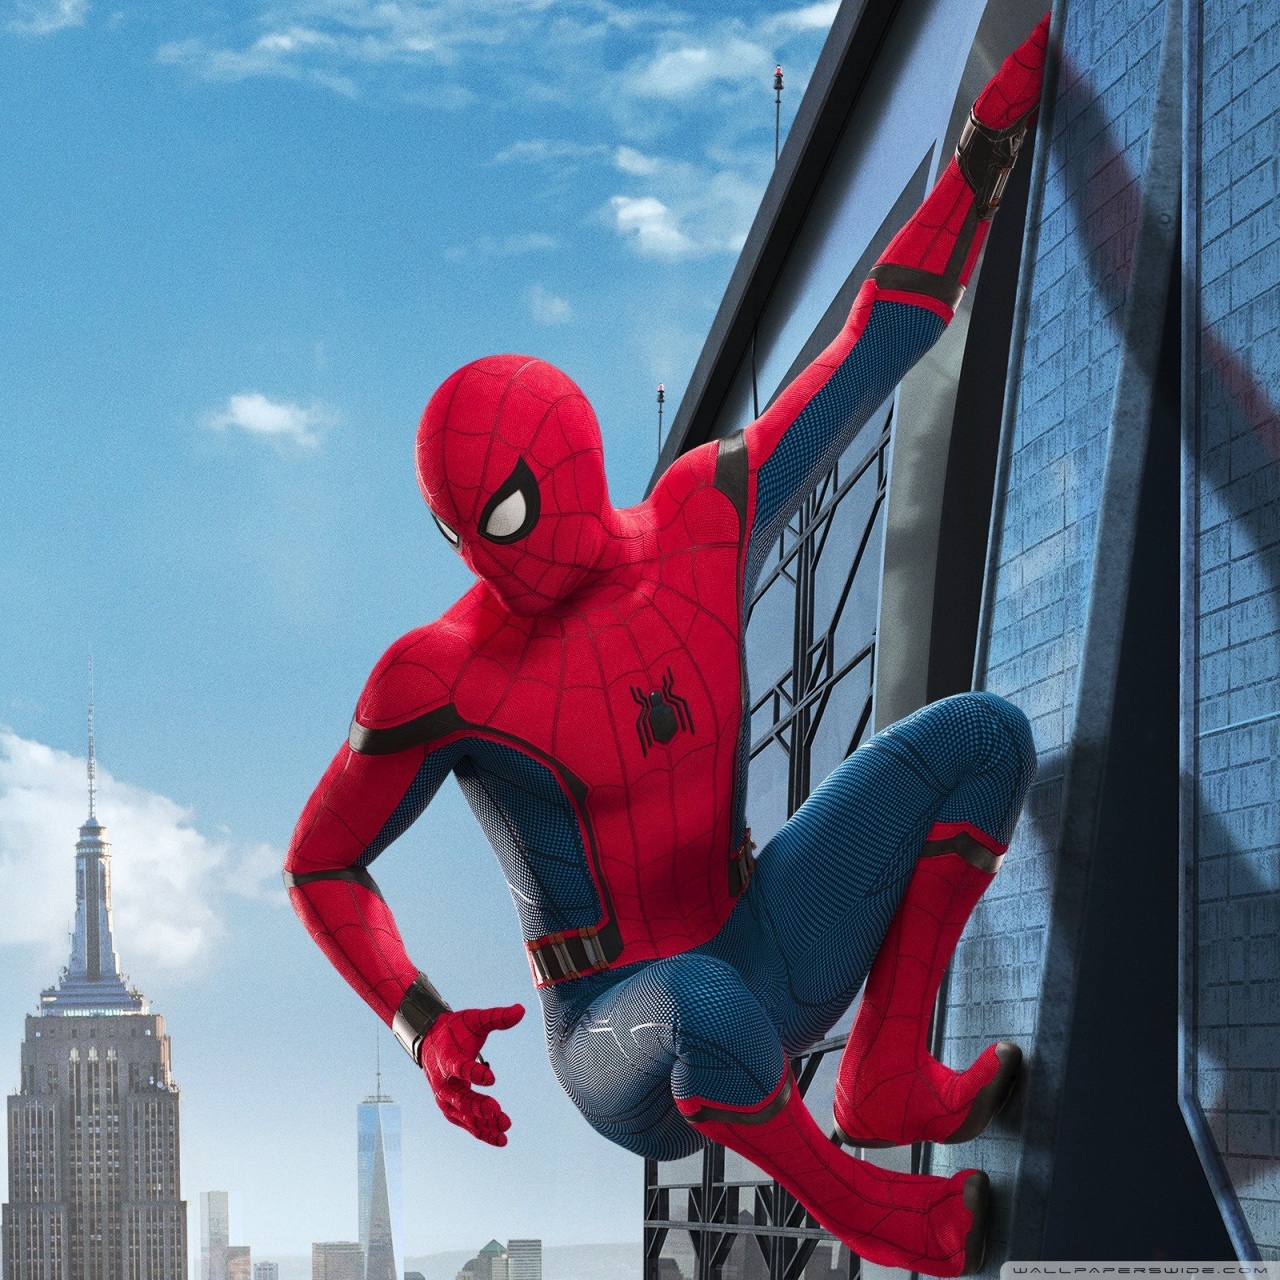 Ipad - Spiderman On Empire State Building , HD Wallpaper & Backgrounds